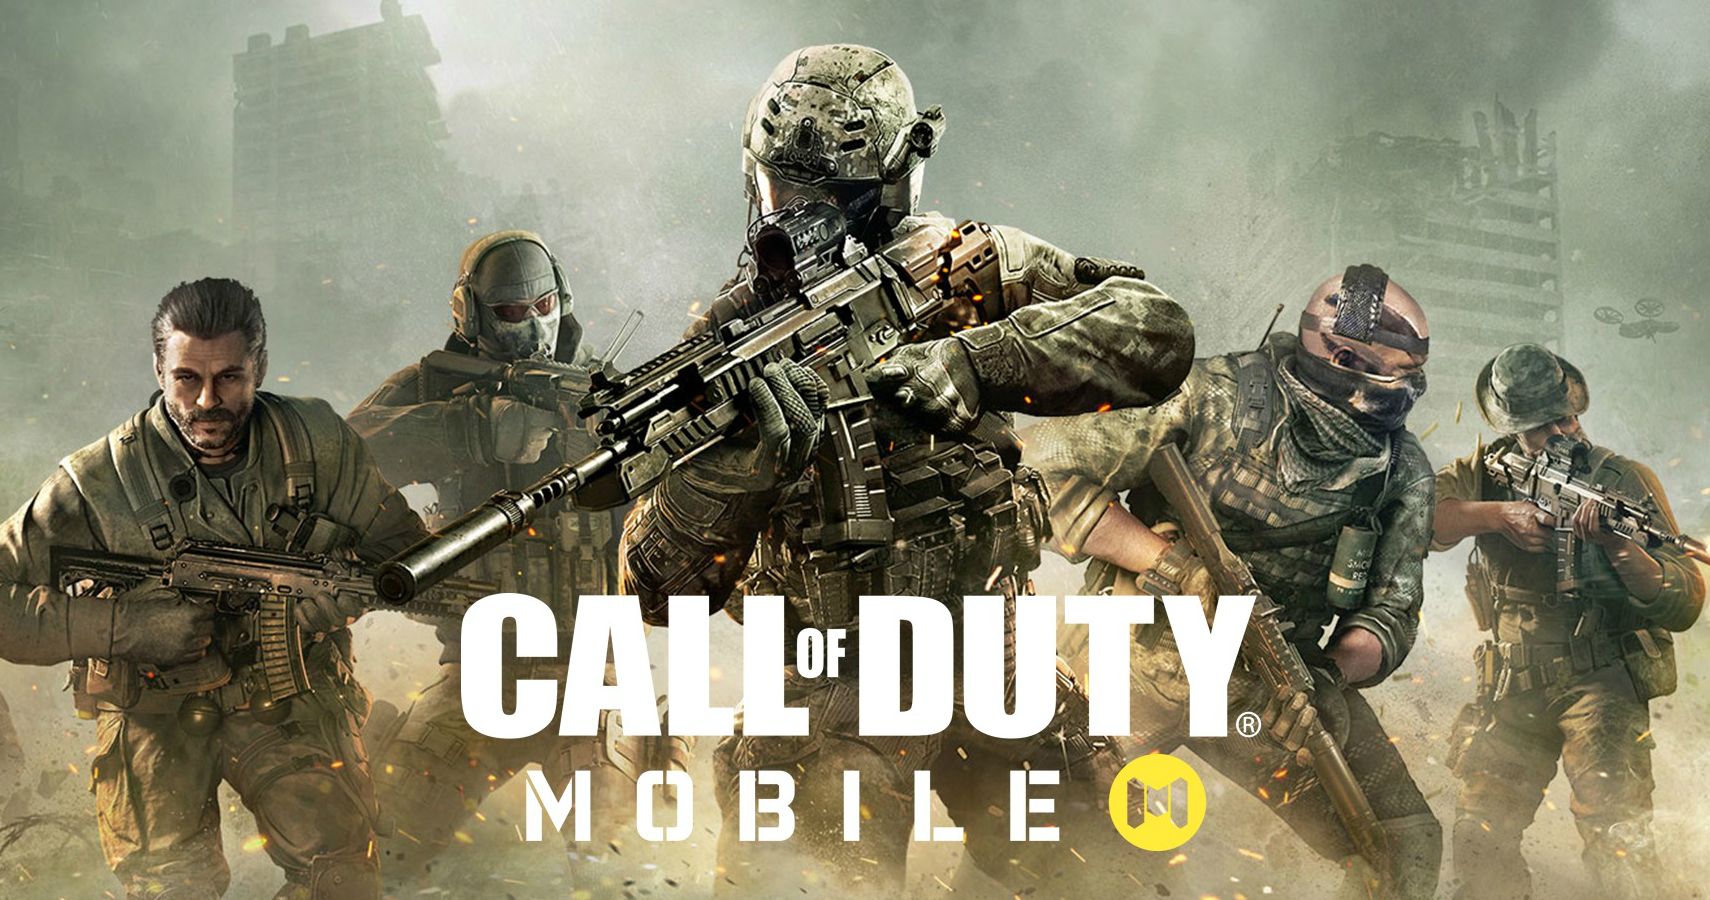 COD MOBILE, CALL OF DUTY